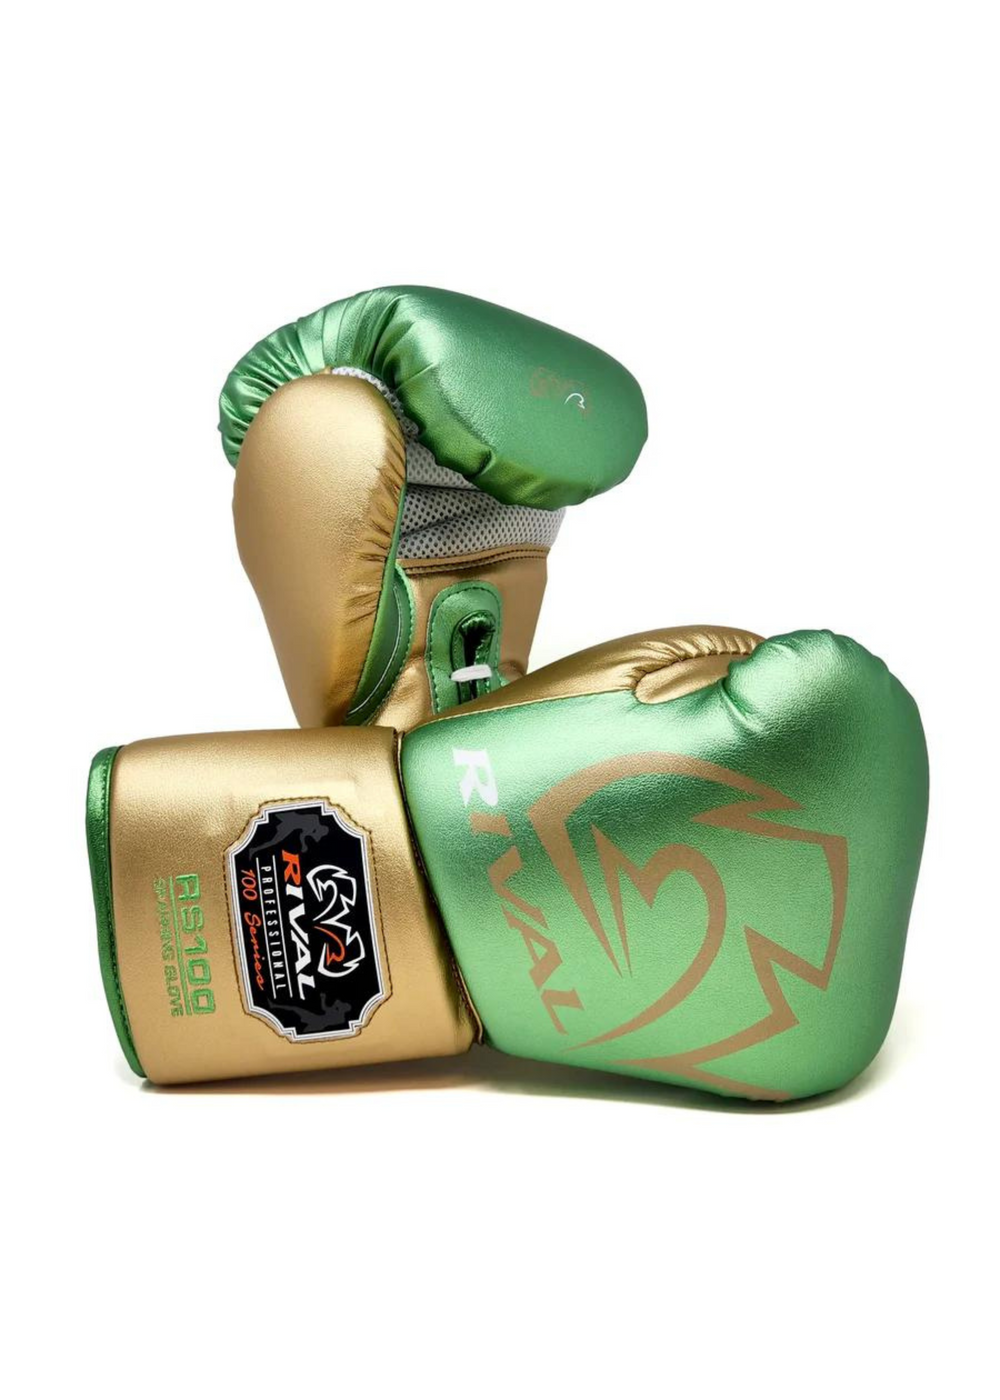 RIVAL RS100 PROFESSIONAL SPARRING GLOVES - Green/Gold